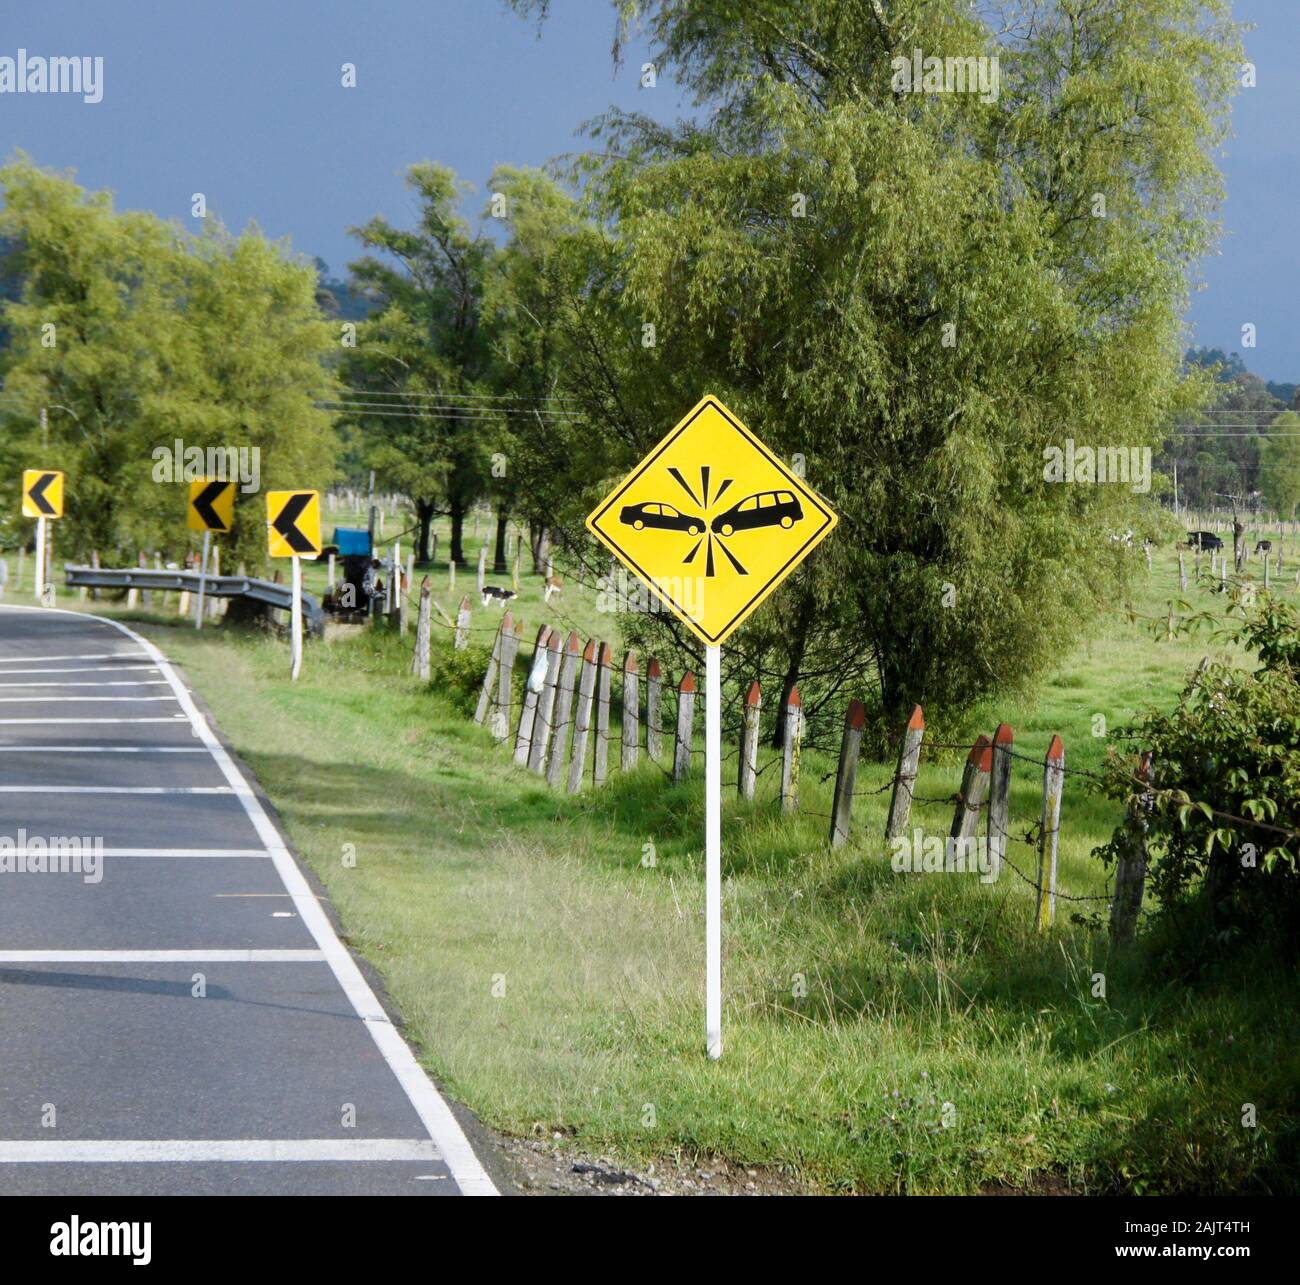 Warning sign on dangerous highway curve in rural Colombia Stock Photo